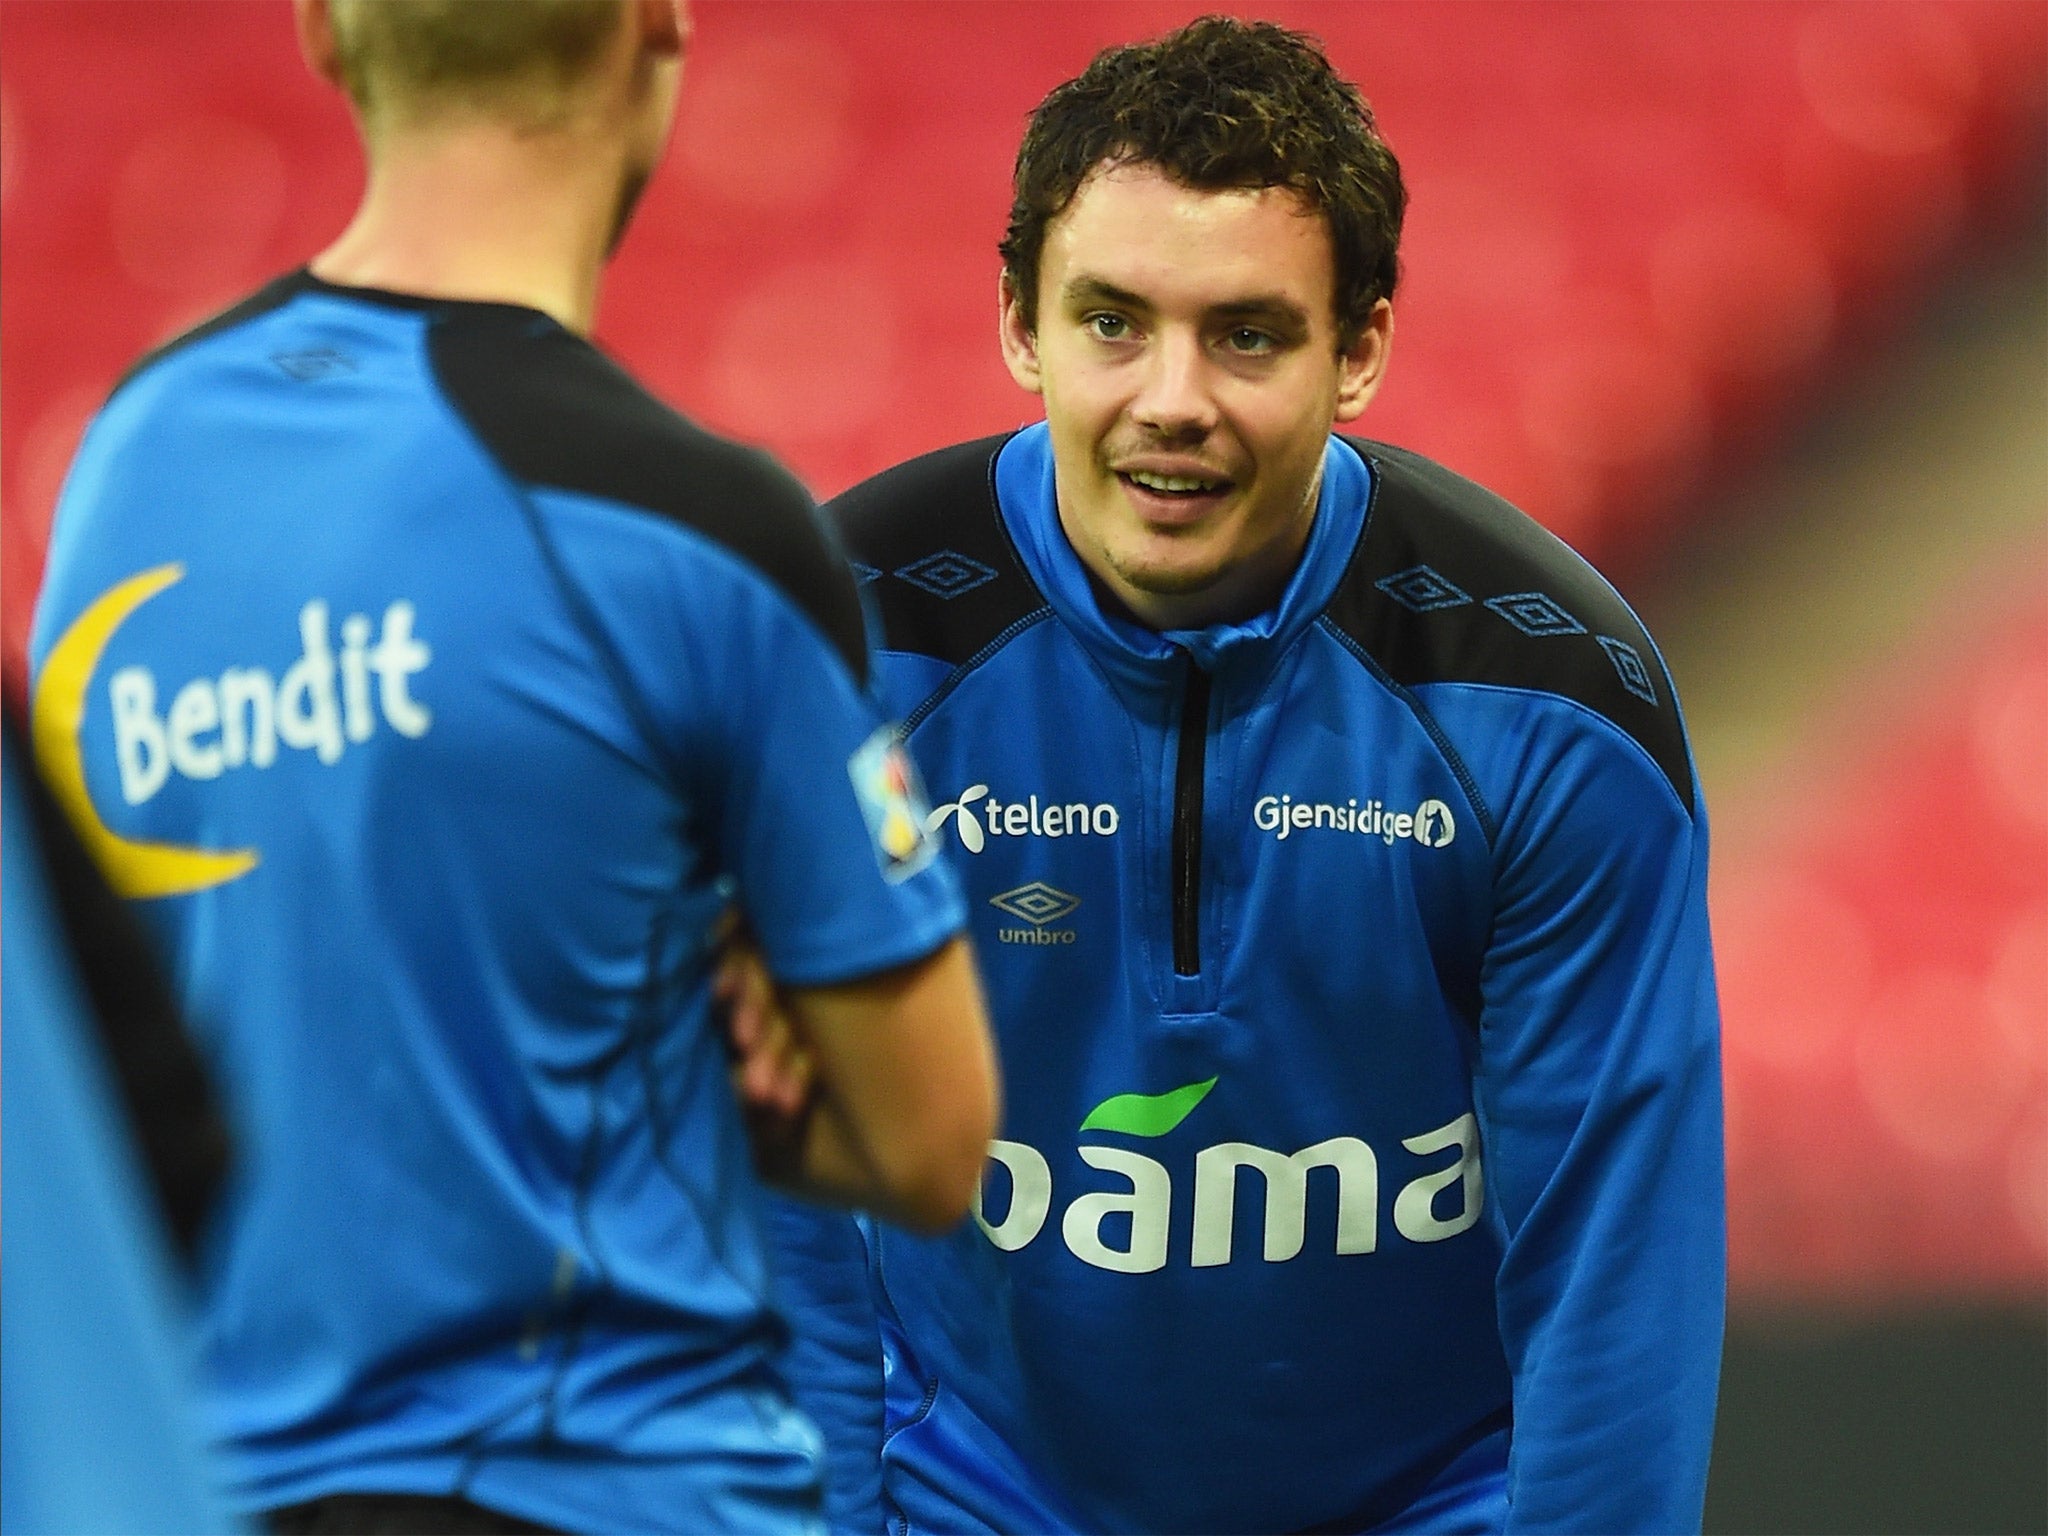 Norway defender Vegard Forren has fired an early volley before tonight’s friendly